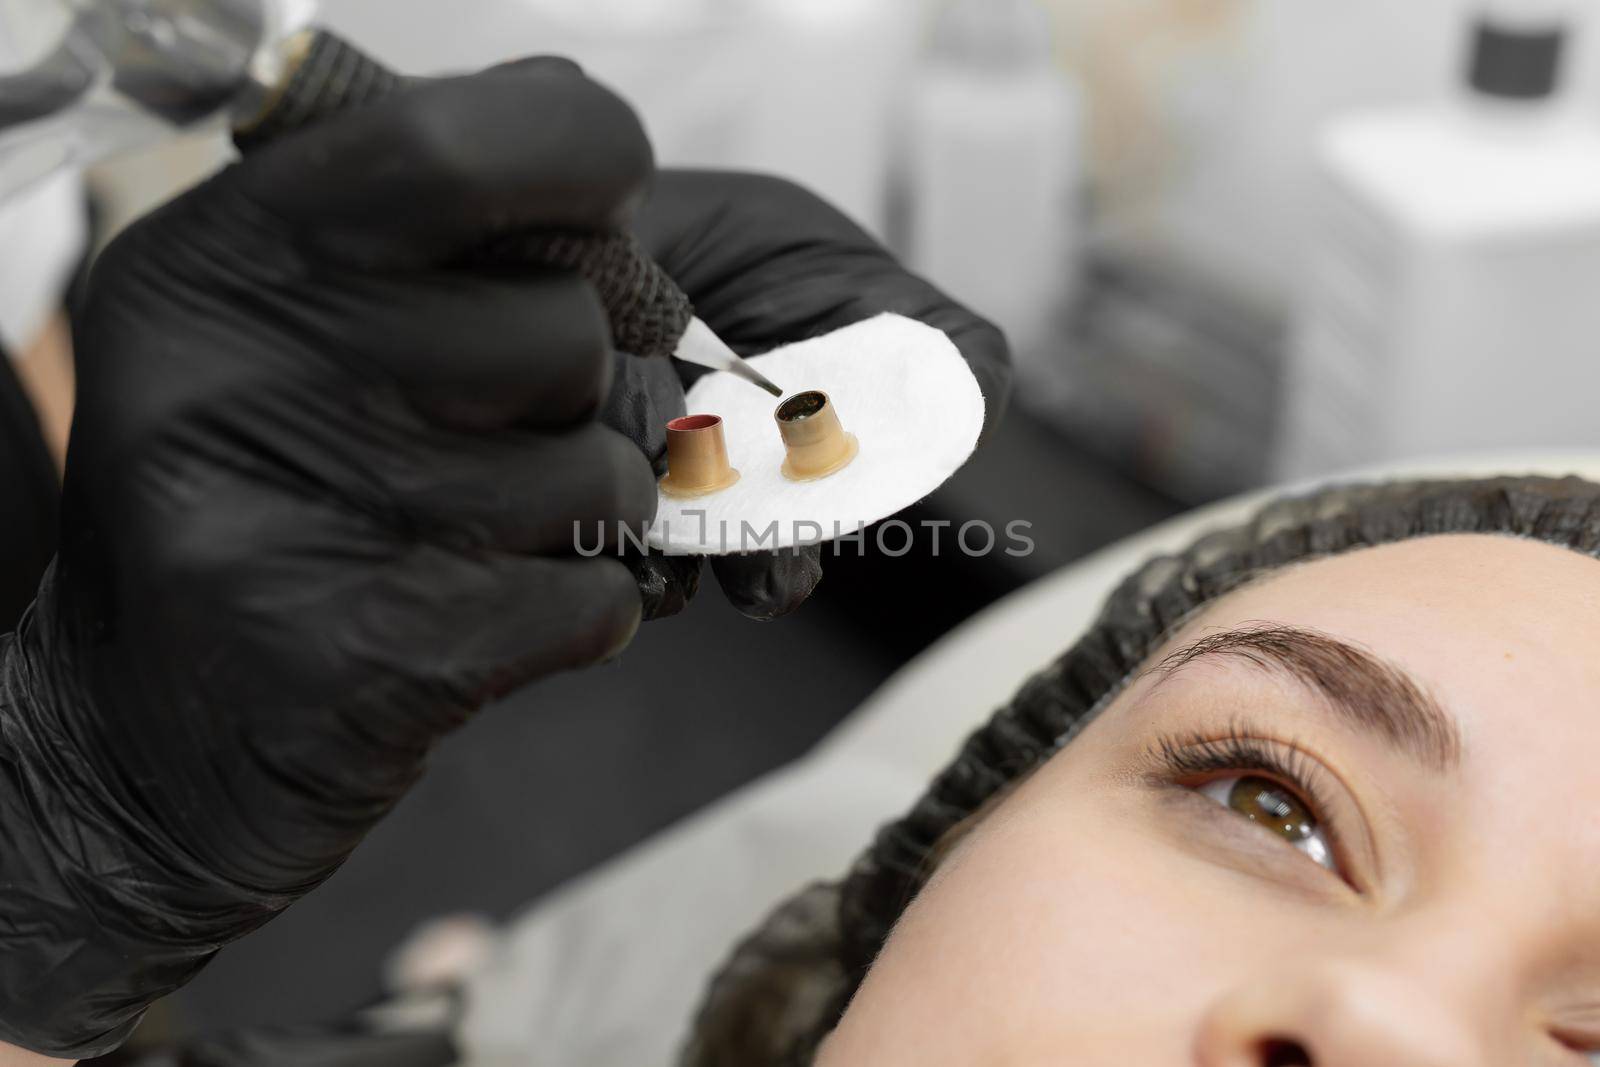 Permanent eyebrow makeup procedure, eyebrow tattooing. The master types paint in the tattoo machine.